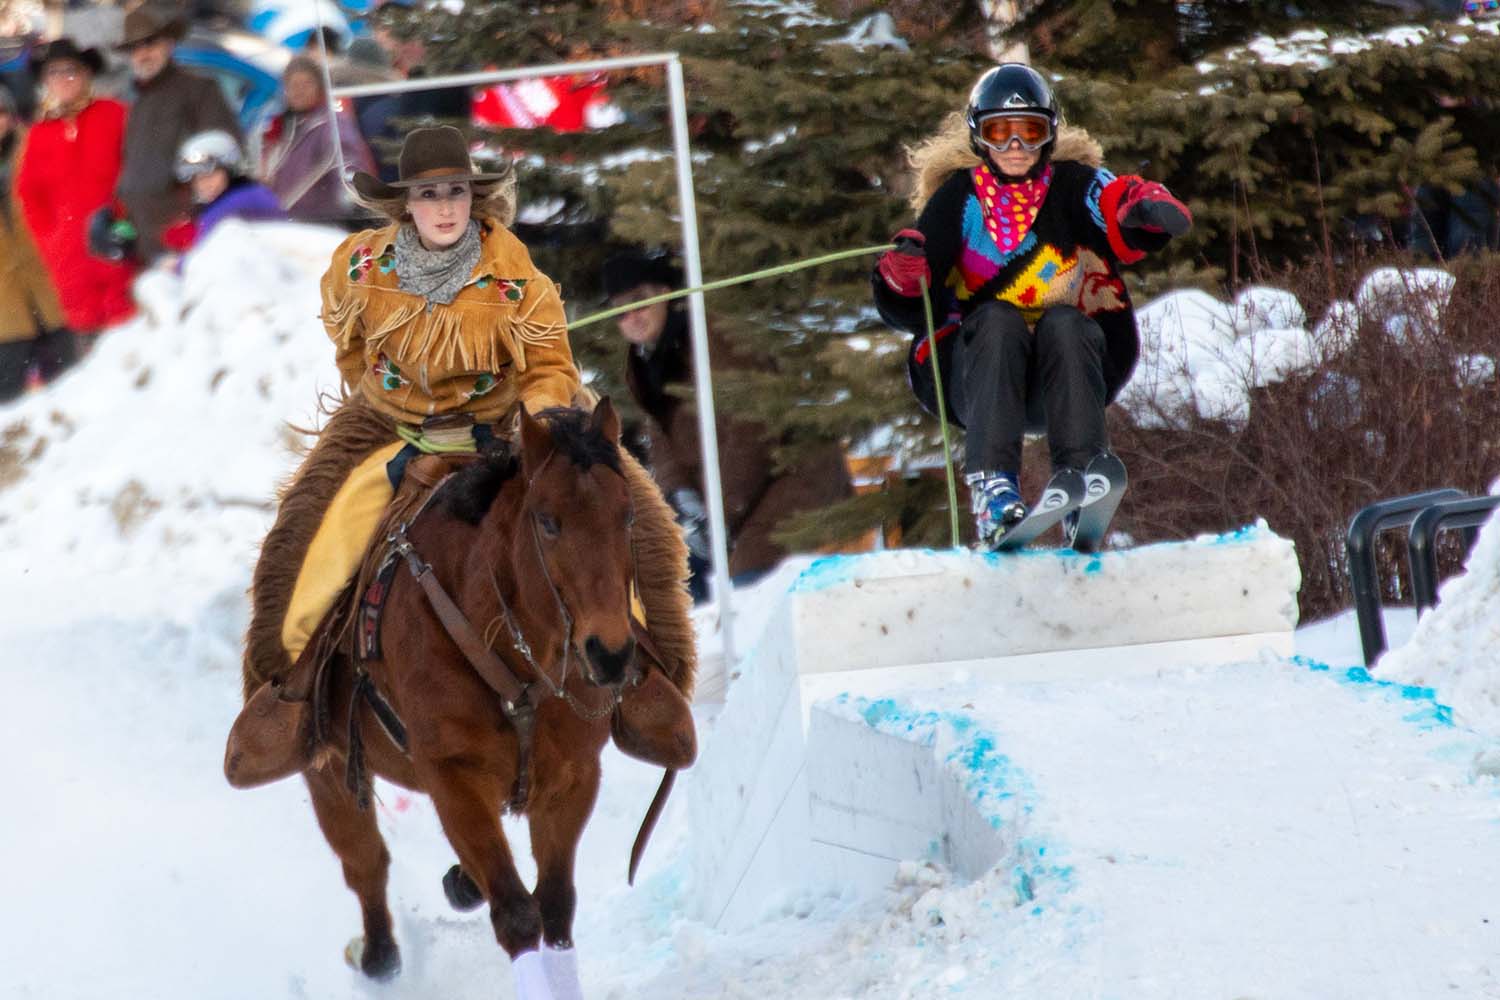 Up close of a horse and rider pulling a skiier